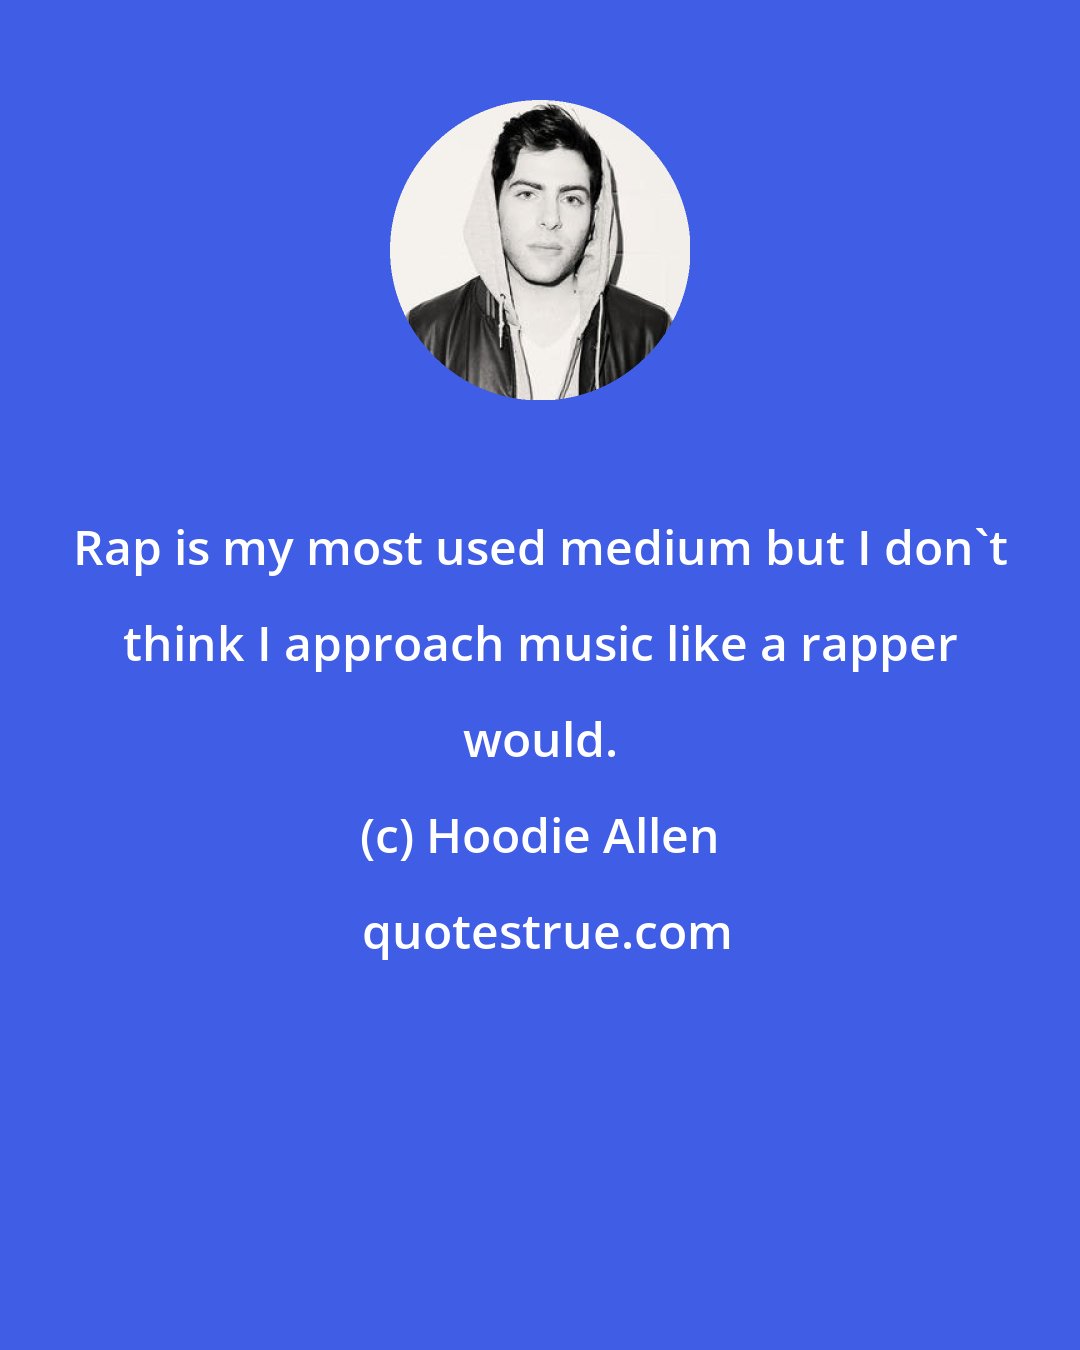 Hoodie Allen: Rap is my most used medium but I don't think I approach music like a rapper would.